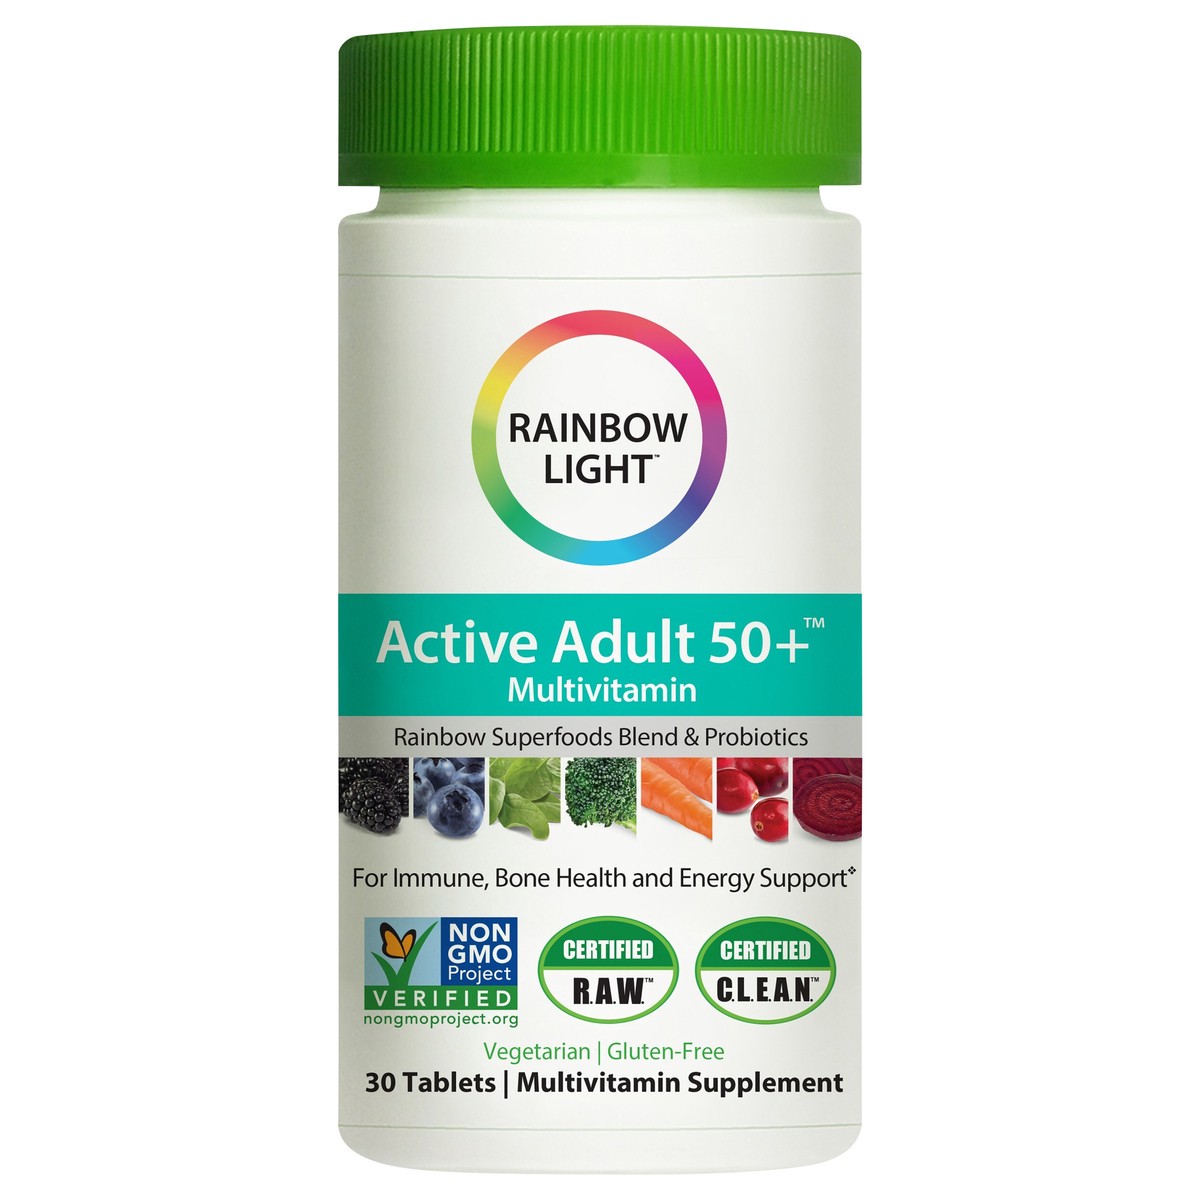 slide 1 of 6, Rainbow Light Active Adult 50+™ Multivitamin with Rainbow Superfoods Blend and Probiotics, 30 Tablets, 30 ct